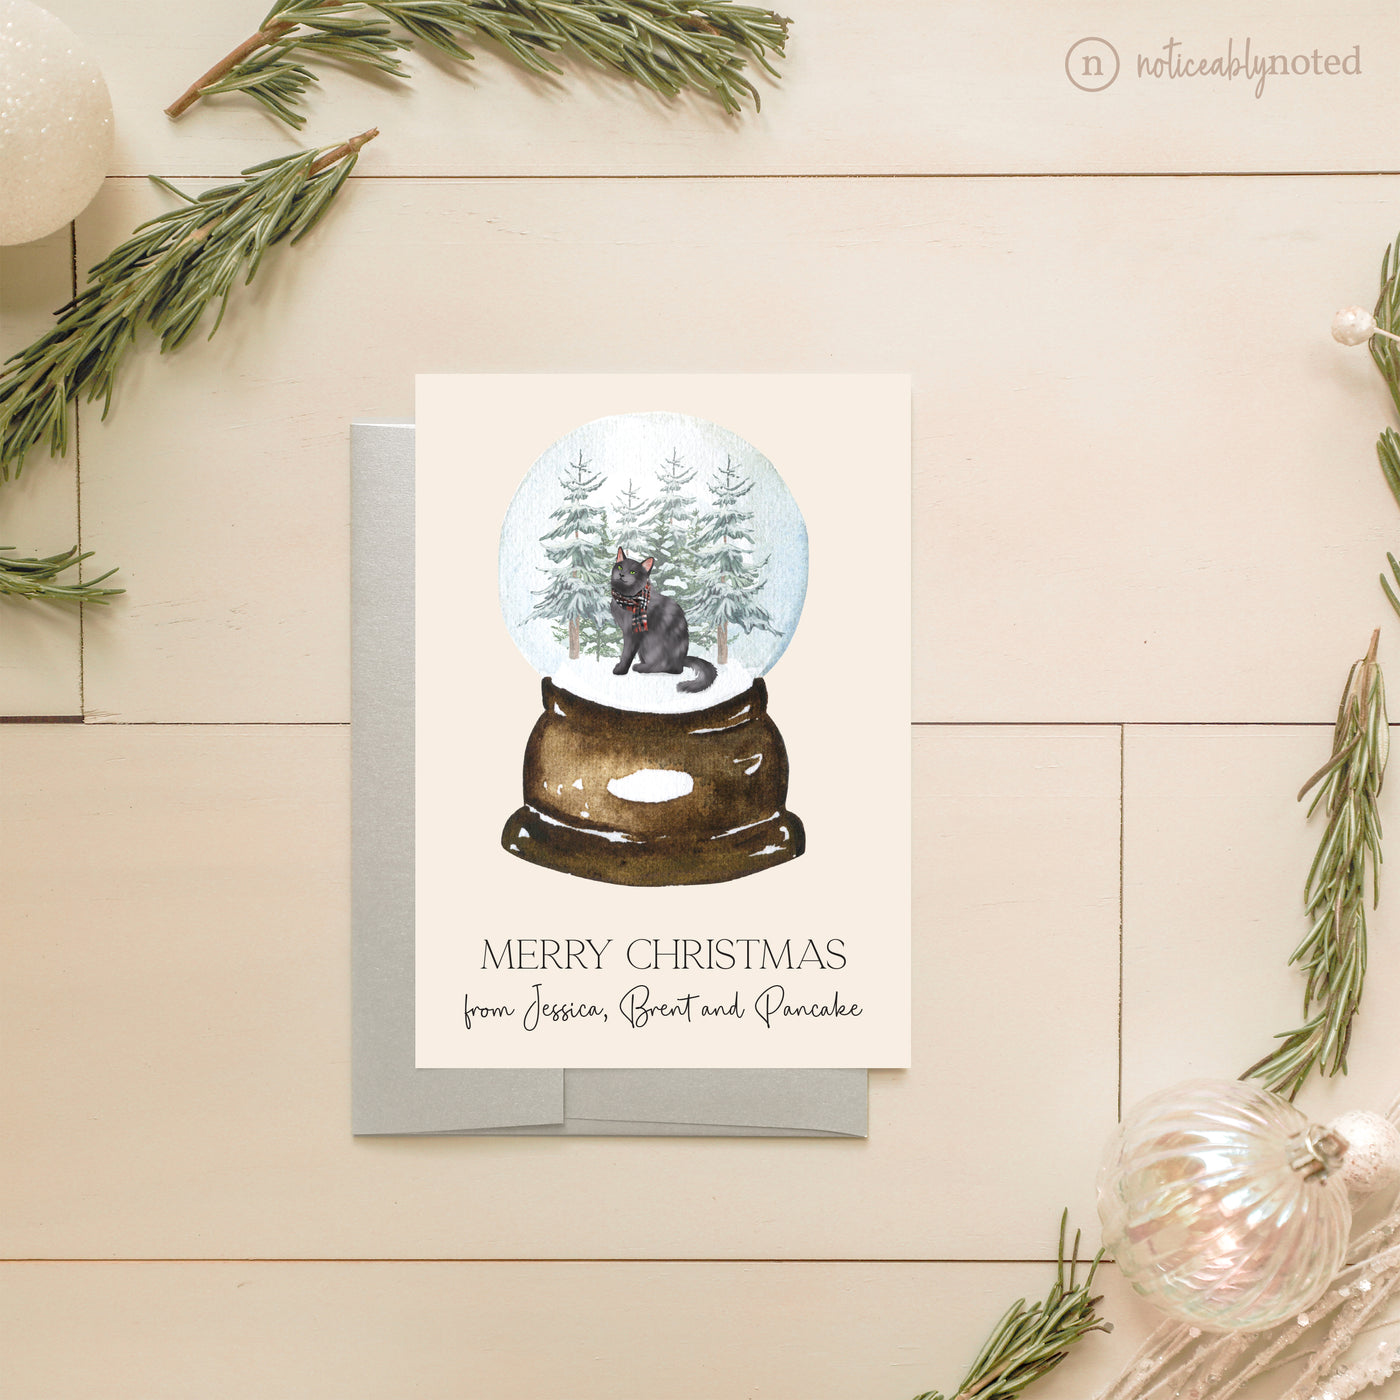 Nebelung Holiday Greeting Cards | Noticeably Noted